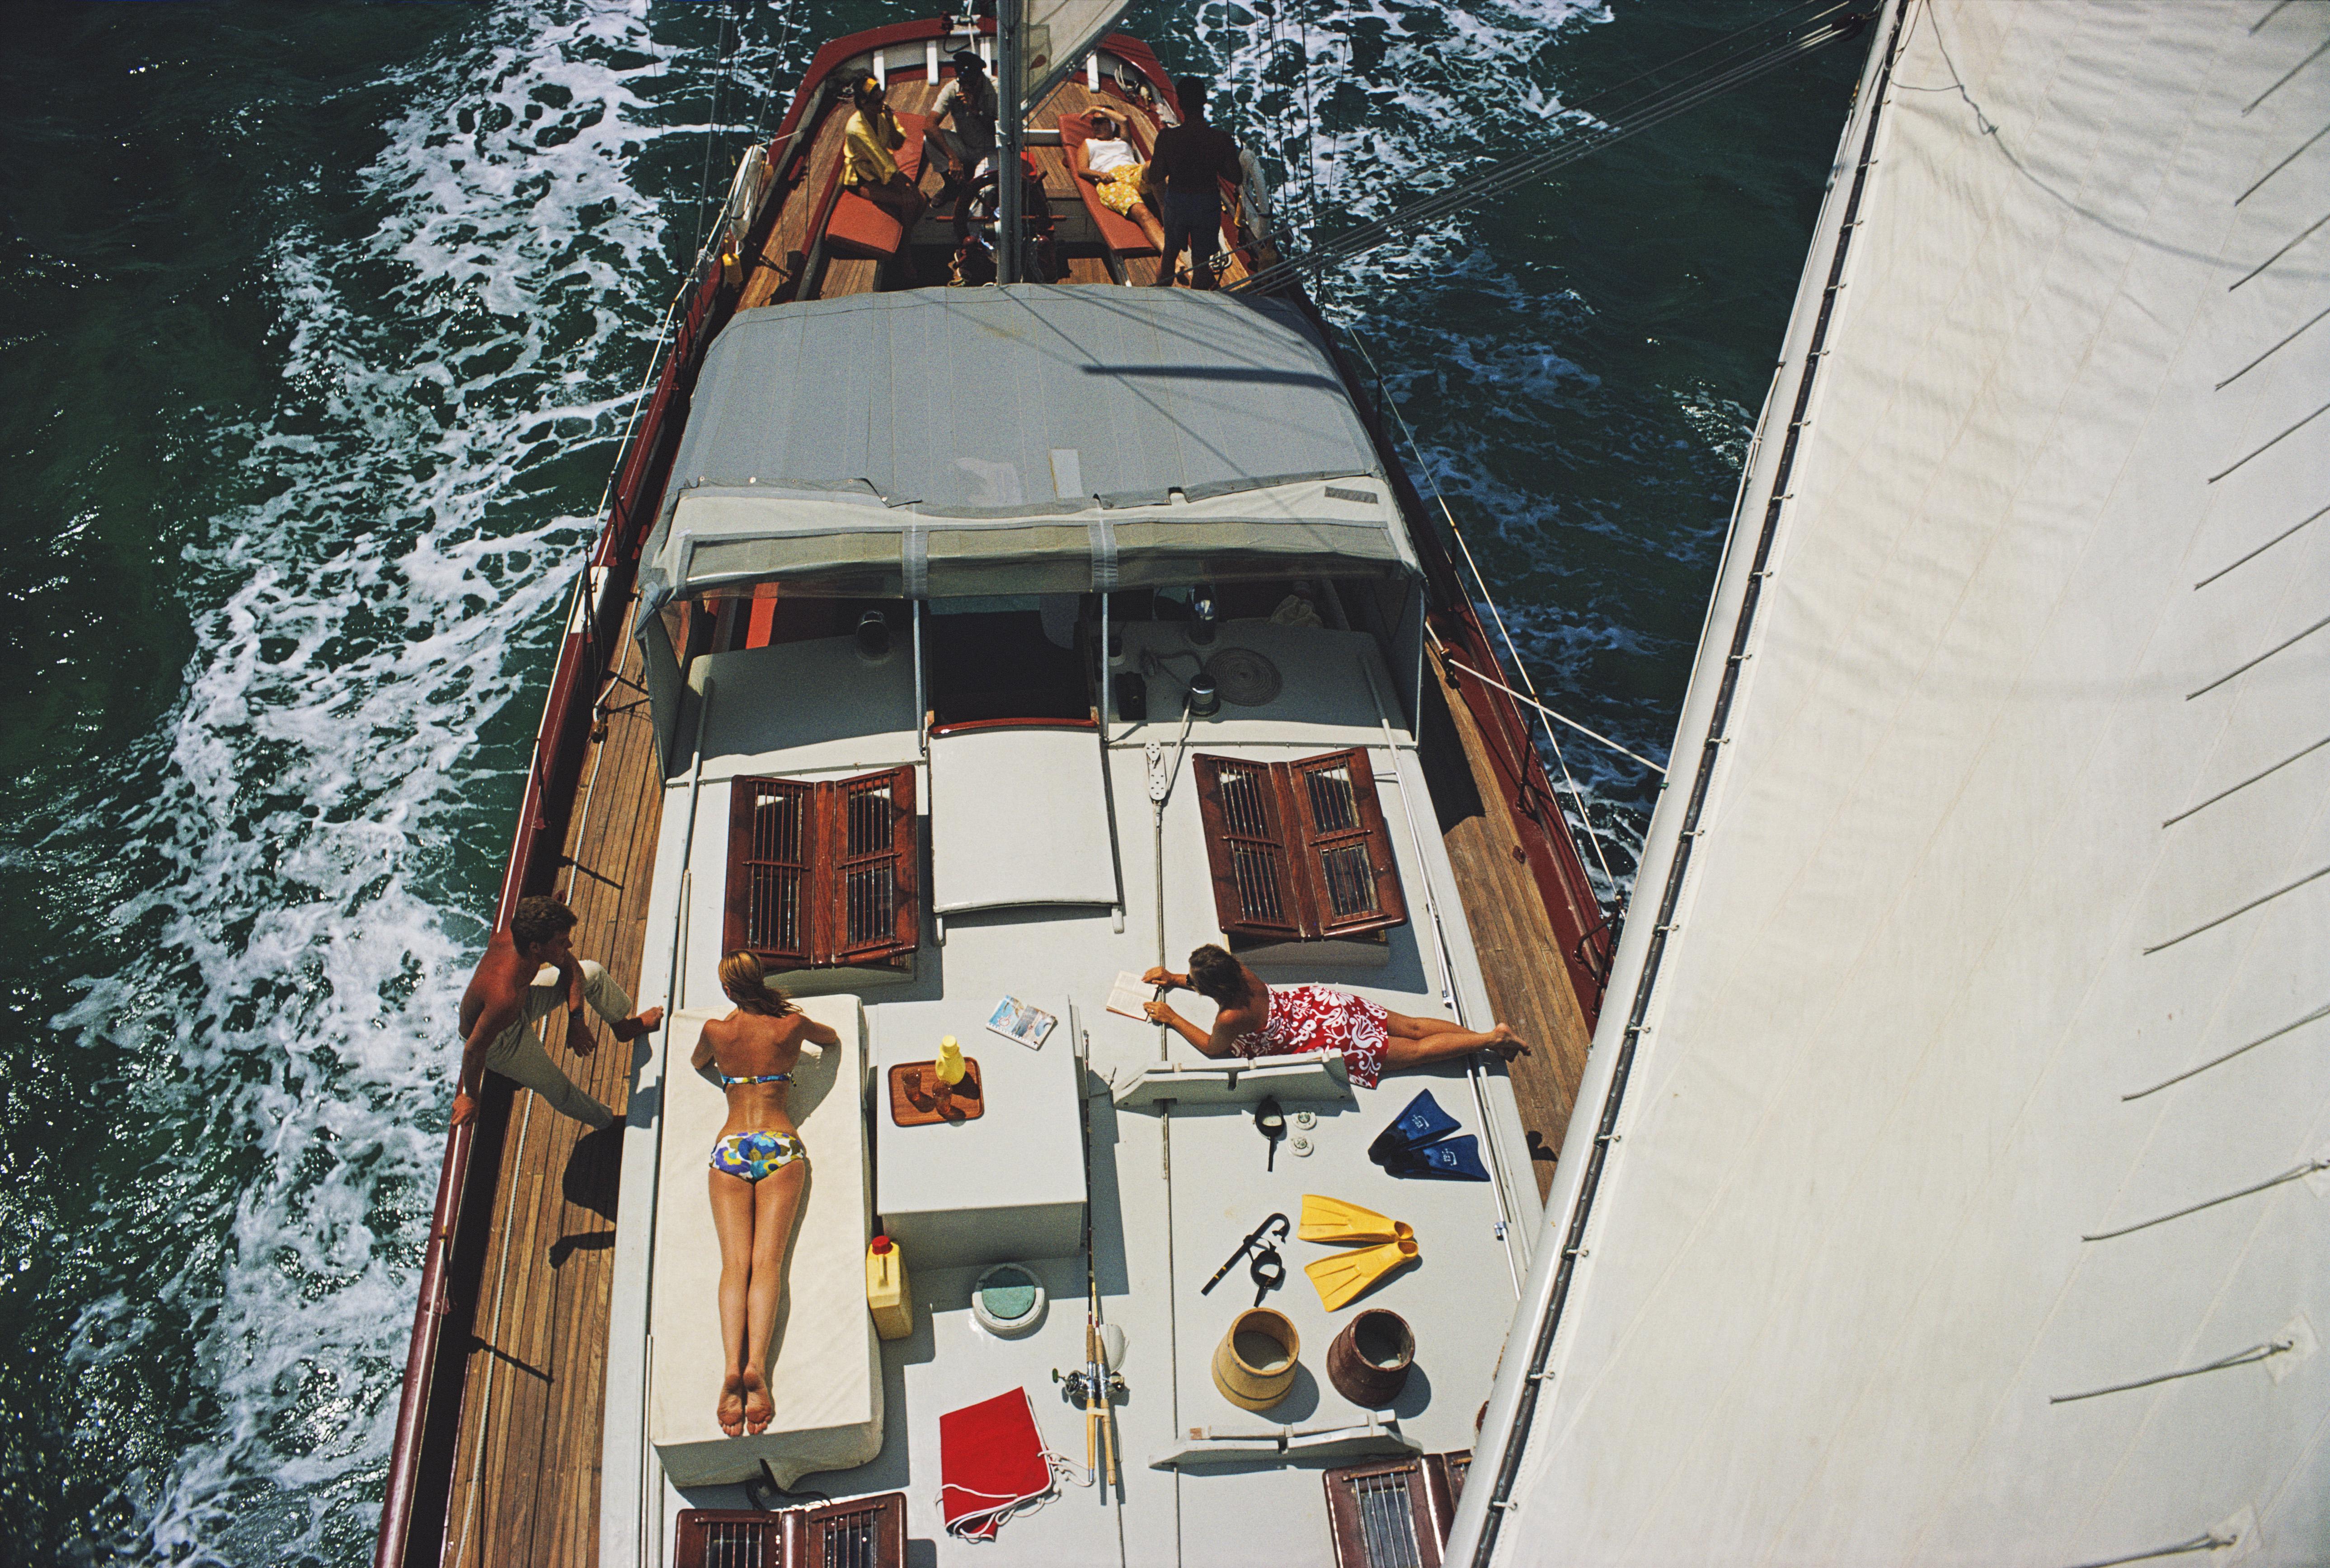 'Deck Dwellers' 1967 Slim Aarons Limited Estate Edition Print 

General view looking down on sunbathers on the deck of the yacht 'Traveler II', off the coast of Exuma in the Bahamas, April 1967. The image has been taken from a vantage point on the